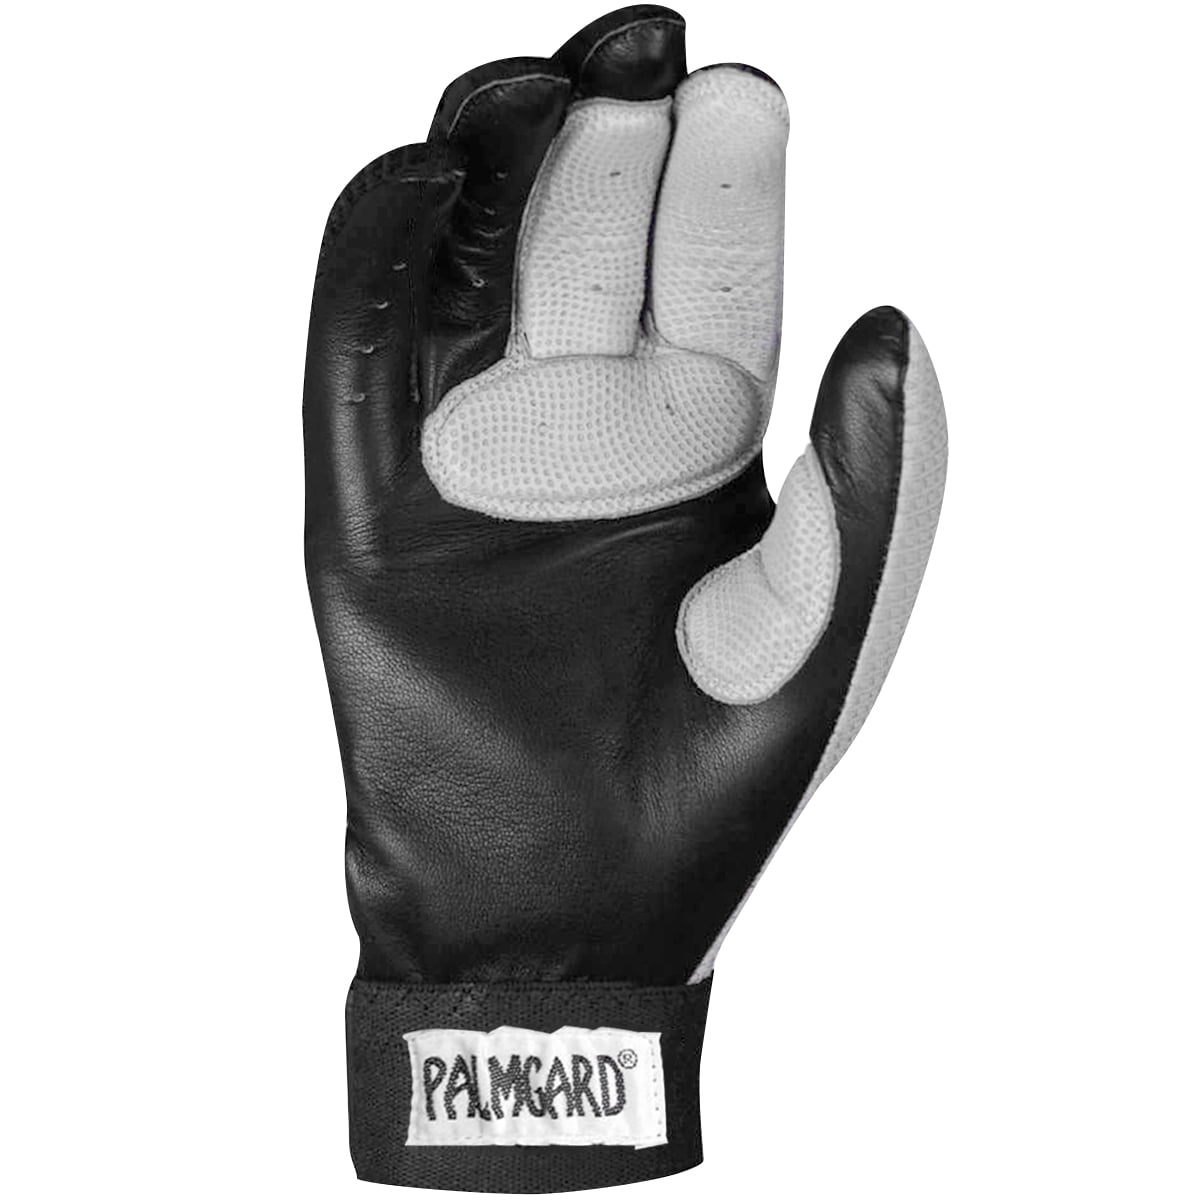 Palmgard Inner Glove WP with builit-in Wristgard for Baseball and Softball 